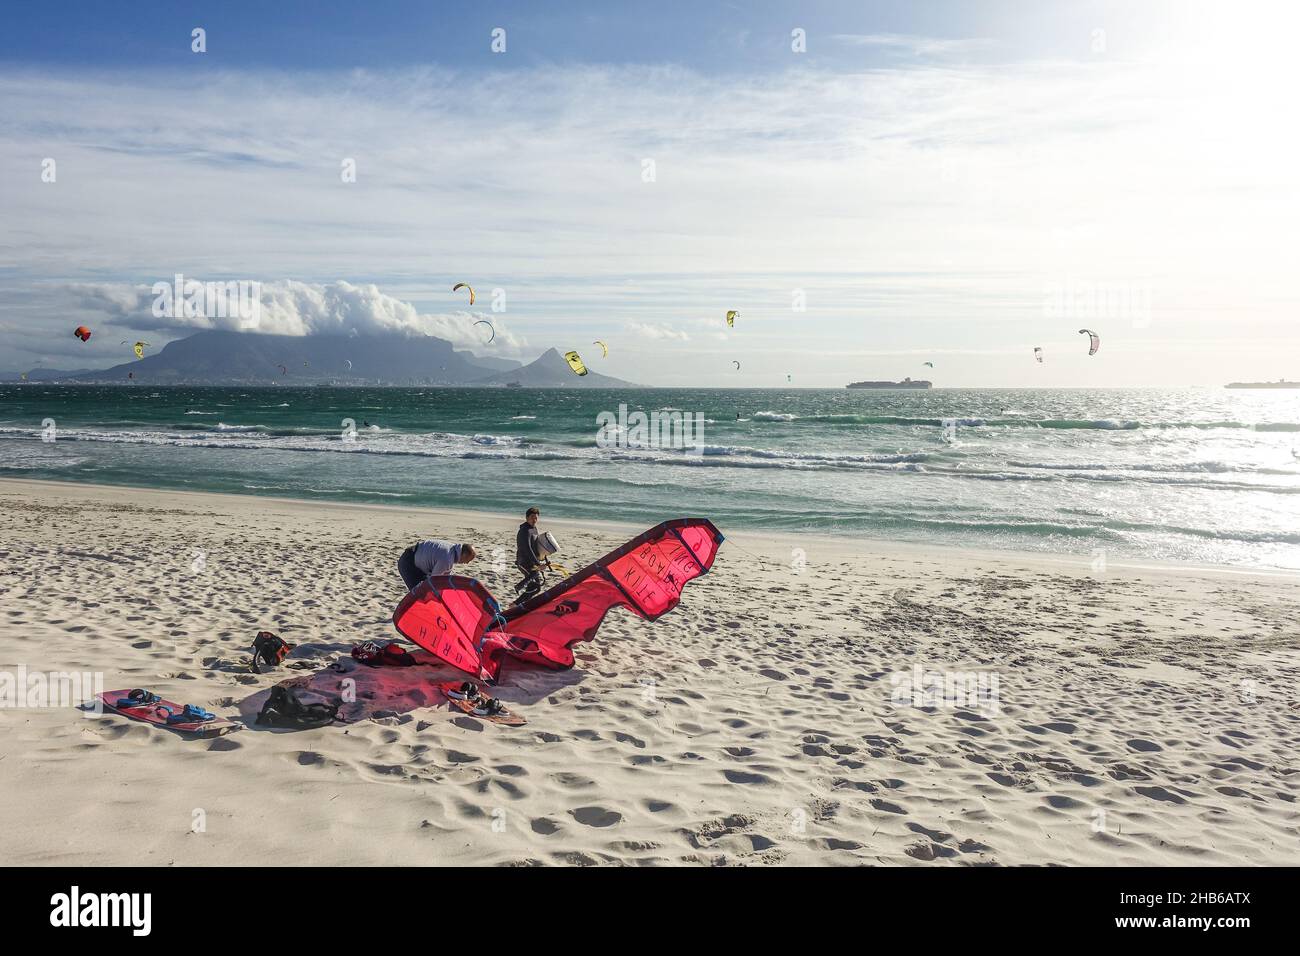 Kitesurfers setting up a red kite on Kite beach, Blouberg, Cape Town, South Africa Stock Photo